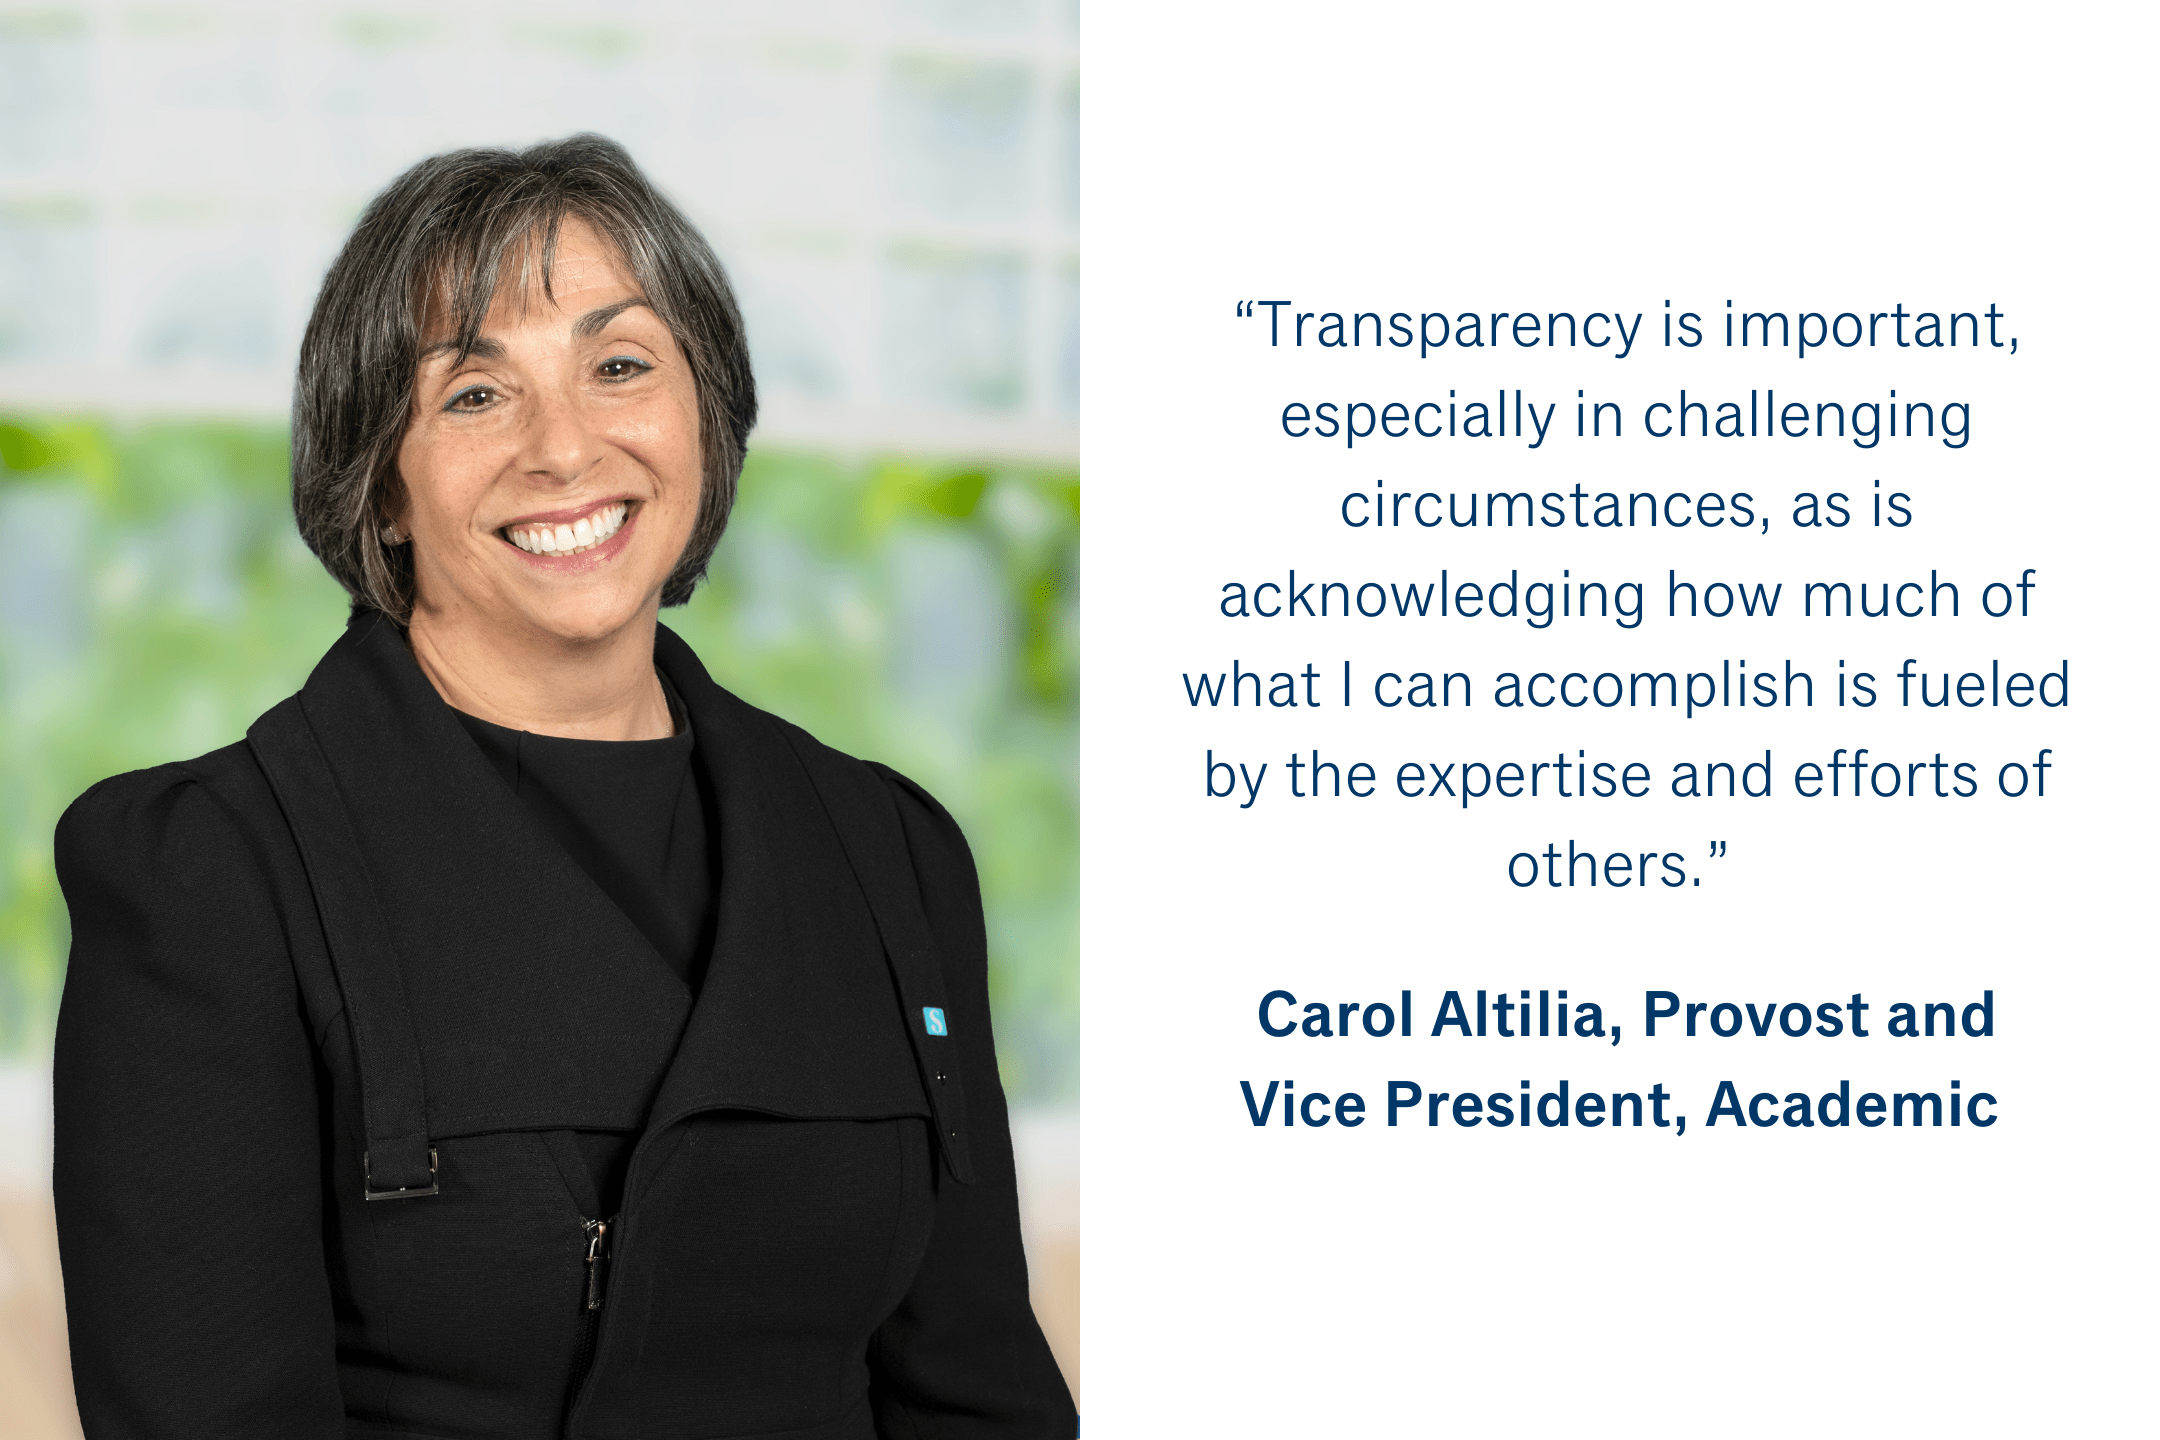 “Transparency is important, especially in challenging circumstances, as is acknowledging how much of what I can accomplish is fueled by the expertise and efforts of others.” Carol Altilia, Provost and Vice President, Academic 